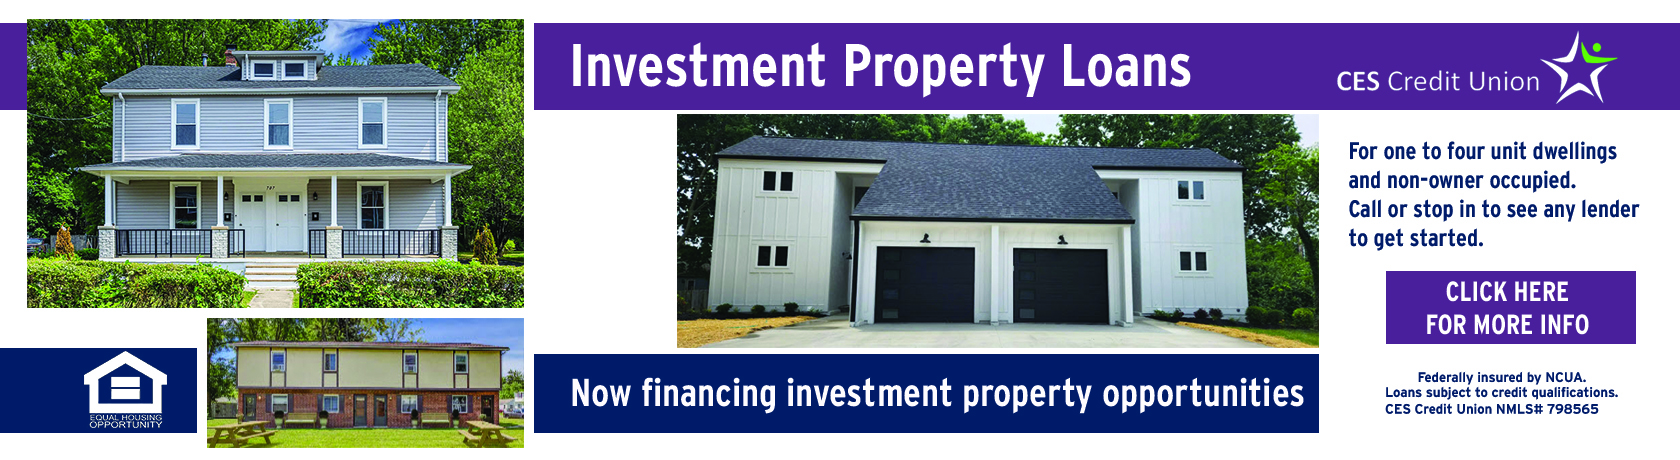 Investment Property loans by CES Credit Union. For one to 4 unit dwellings and non-owner occupied. Call or stop in to any lender to get started. Click for more information. Federally insured by NCUA. Loans subject to credit qualifications. CES Credit Union NMLS 798565. Shows three investment homes, multi-unit. 